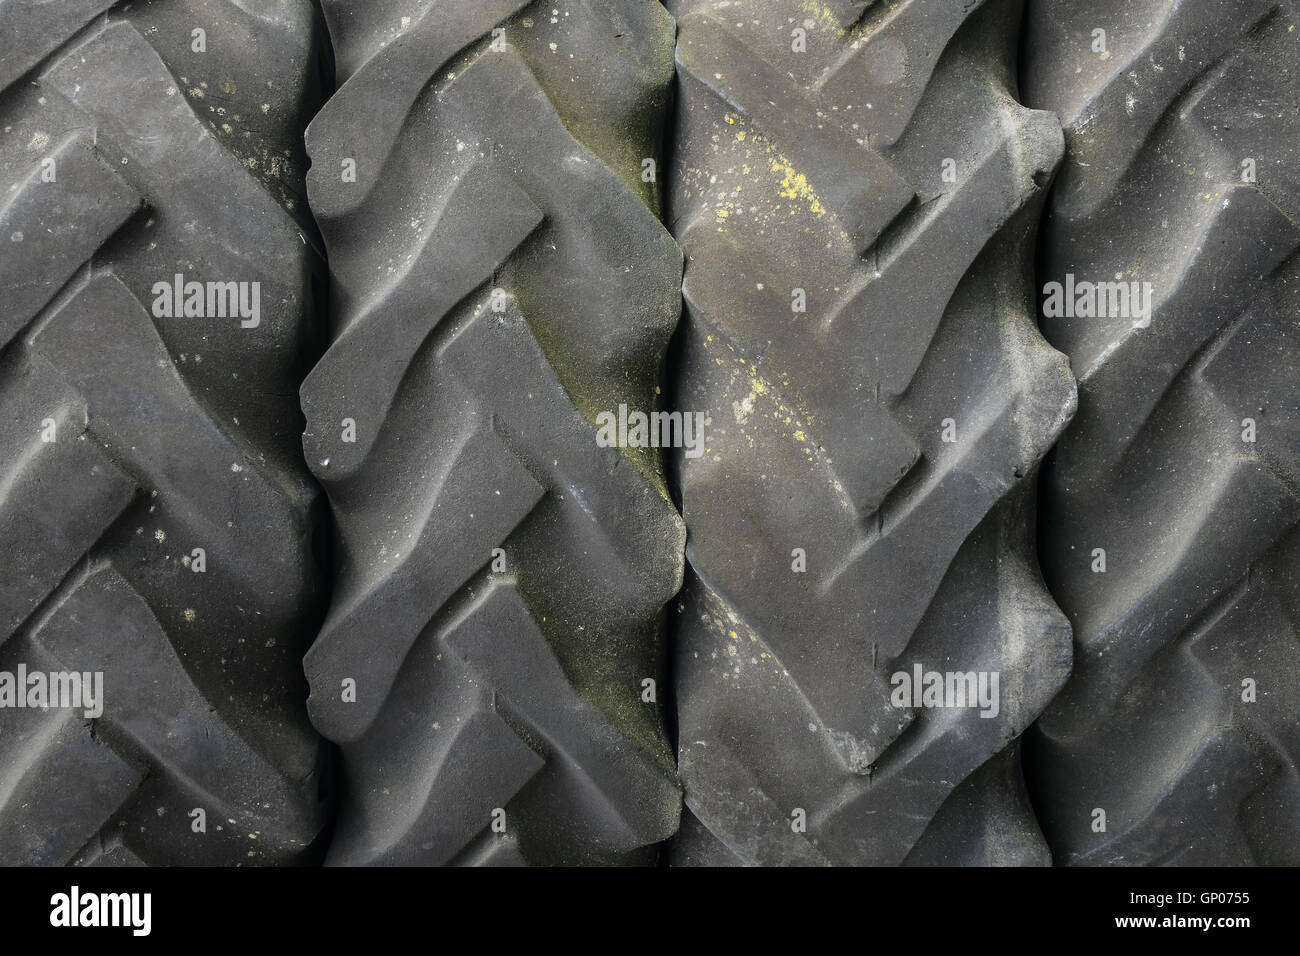 scrapped tractor tires Stock Photo